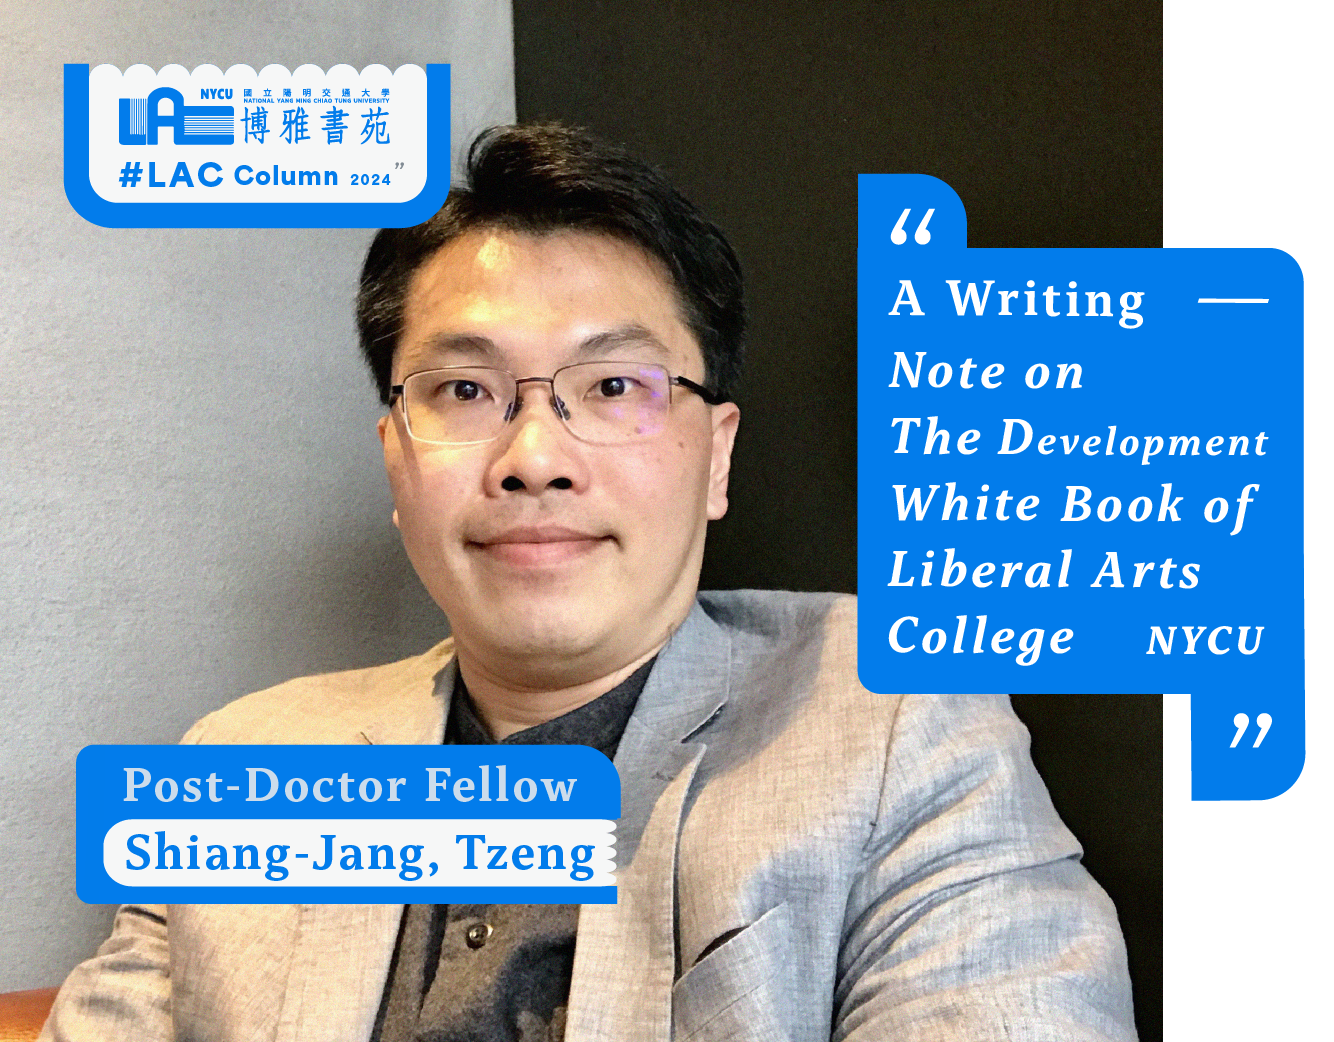 A Writing-Note on The Development White Book of Liberal Arts College NYCU—Shiang-Jang Tzeng